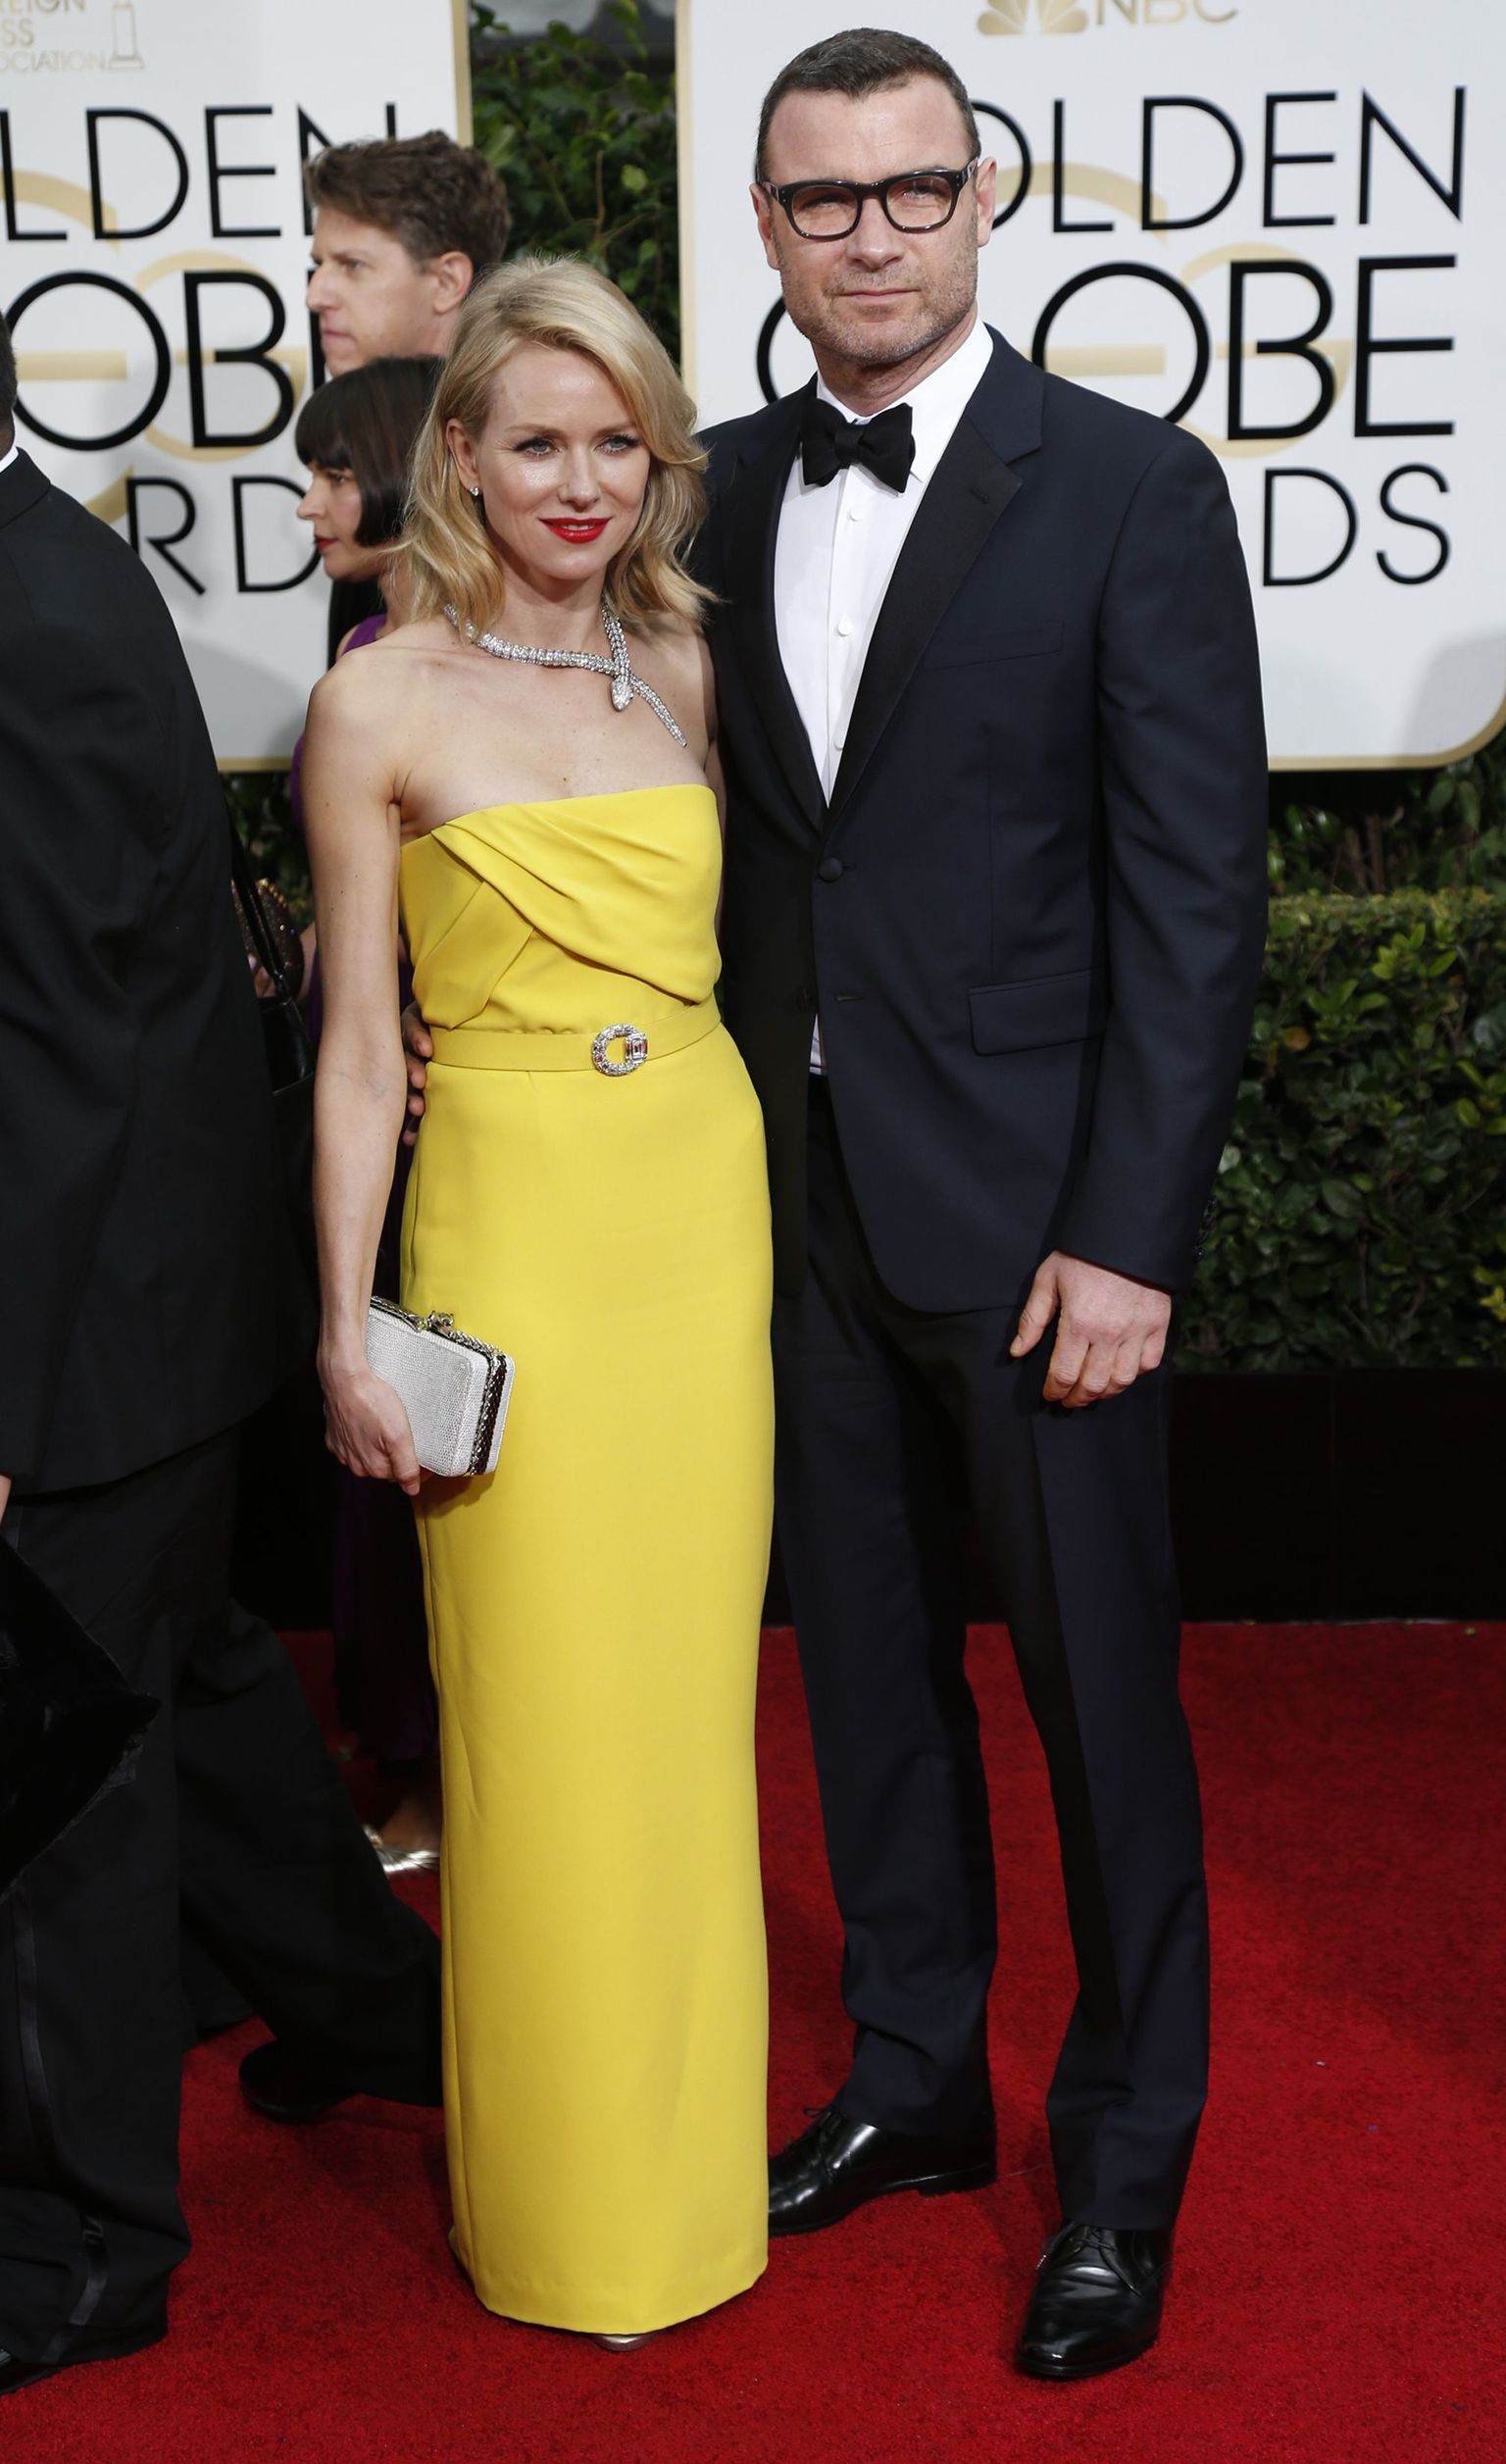 Actors Naomi Watts and Liev Schreiber arrive at the 72nd Golden Globe Awards in Beverly Hills, California January 11, 2015.   REUTERS/Mario Anzuoni (UNITED STATES  - Tags: ENTERTAINMENT)    (GOLDENGLOBES-ARRIVALS)